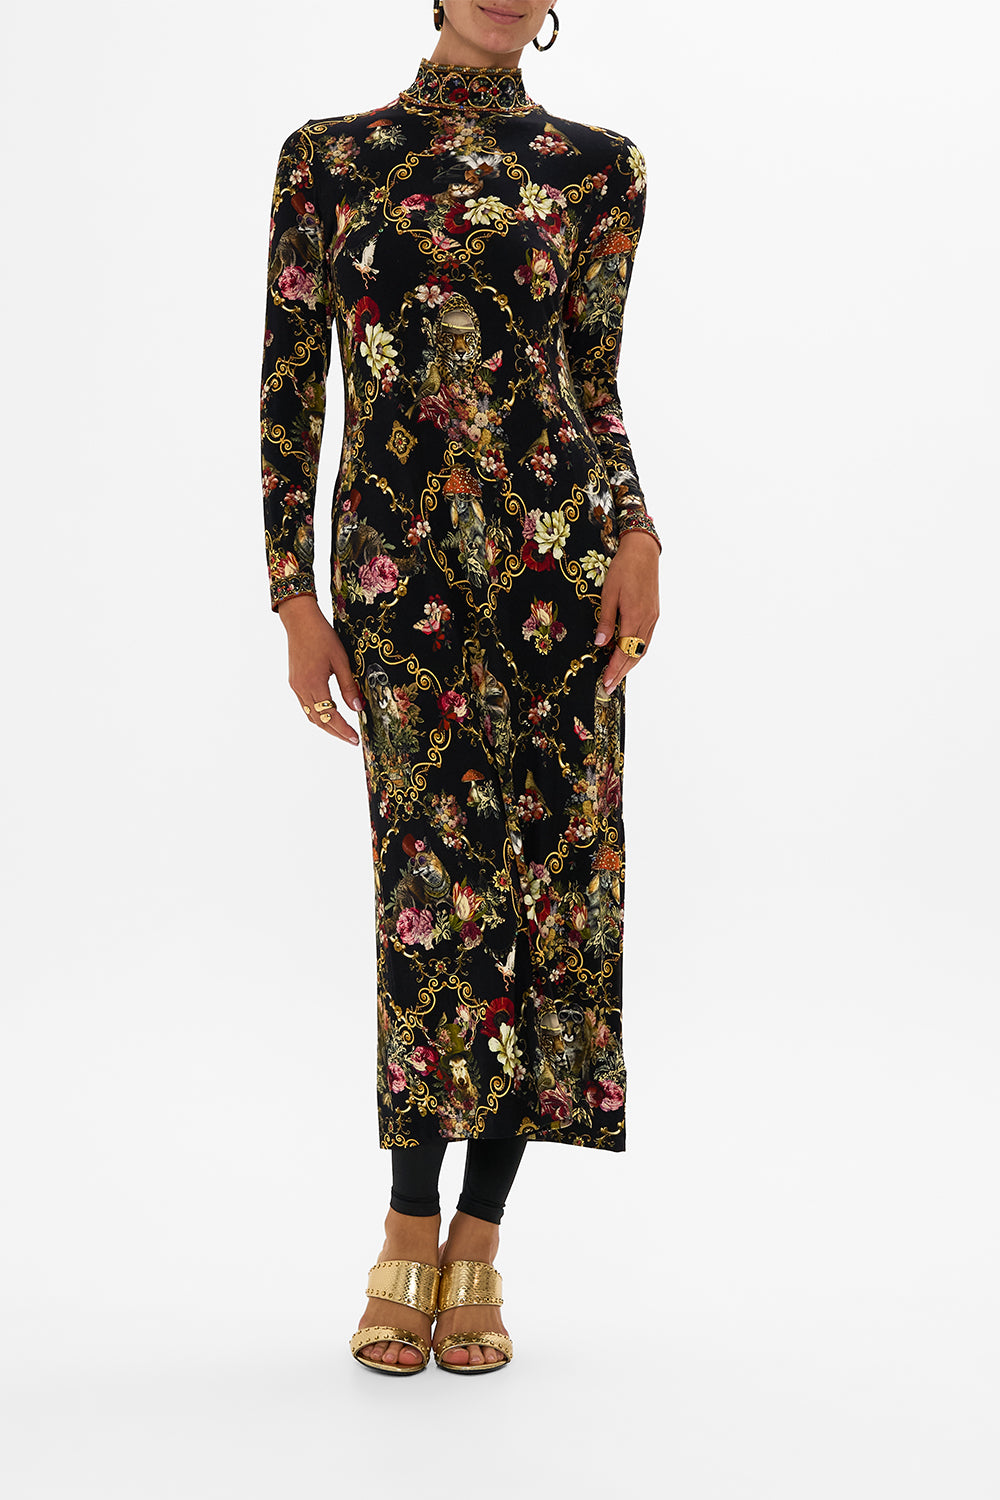 CAMILLA Black Turtleneck Jersey Dress in Told in the Tapestry